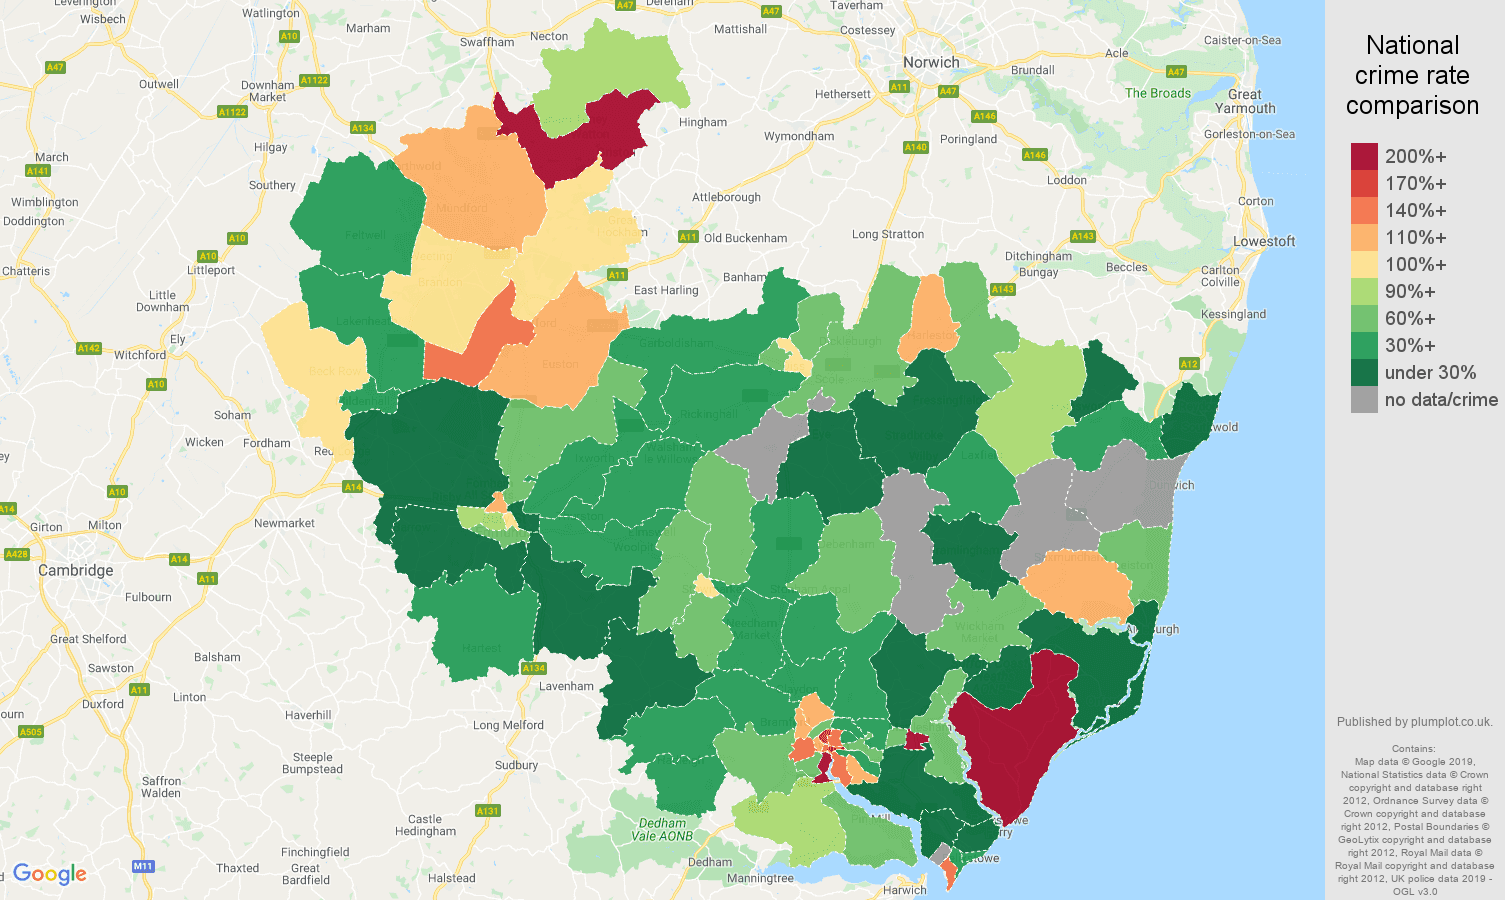 Ipswich other crime rate comparison map